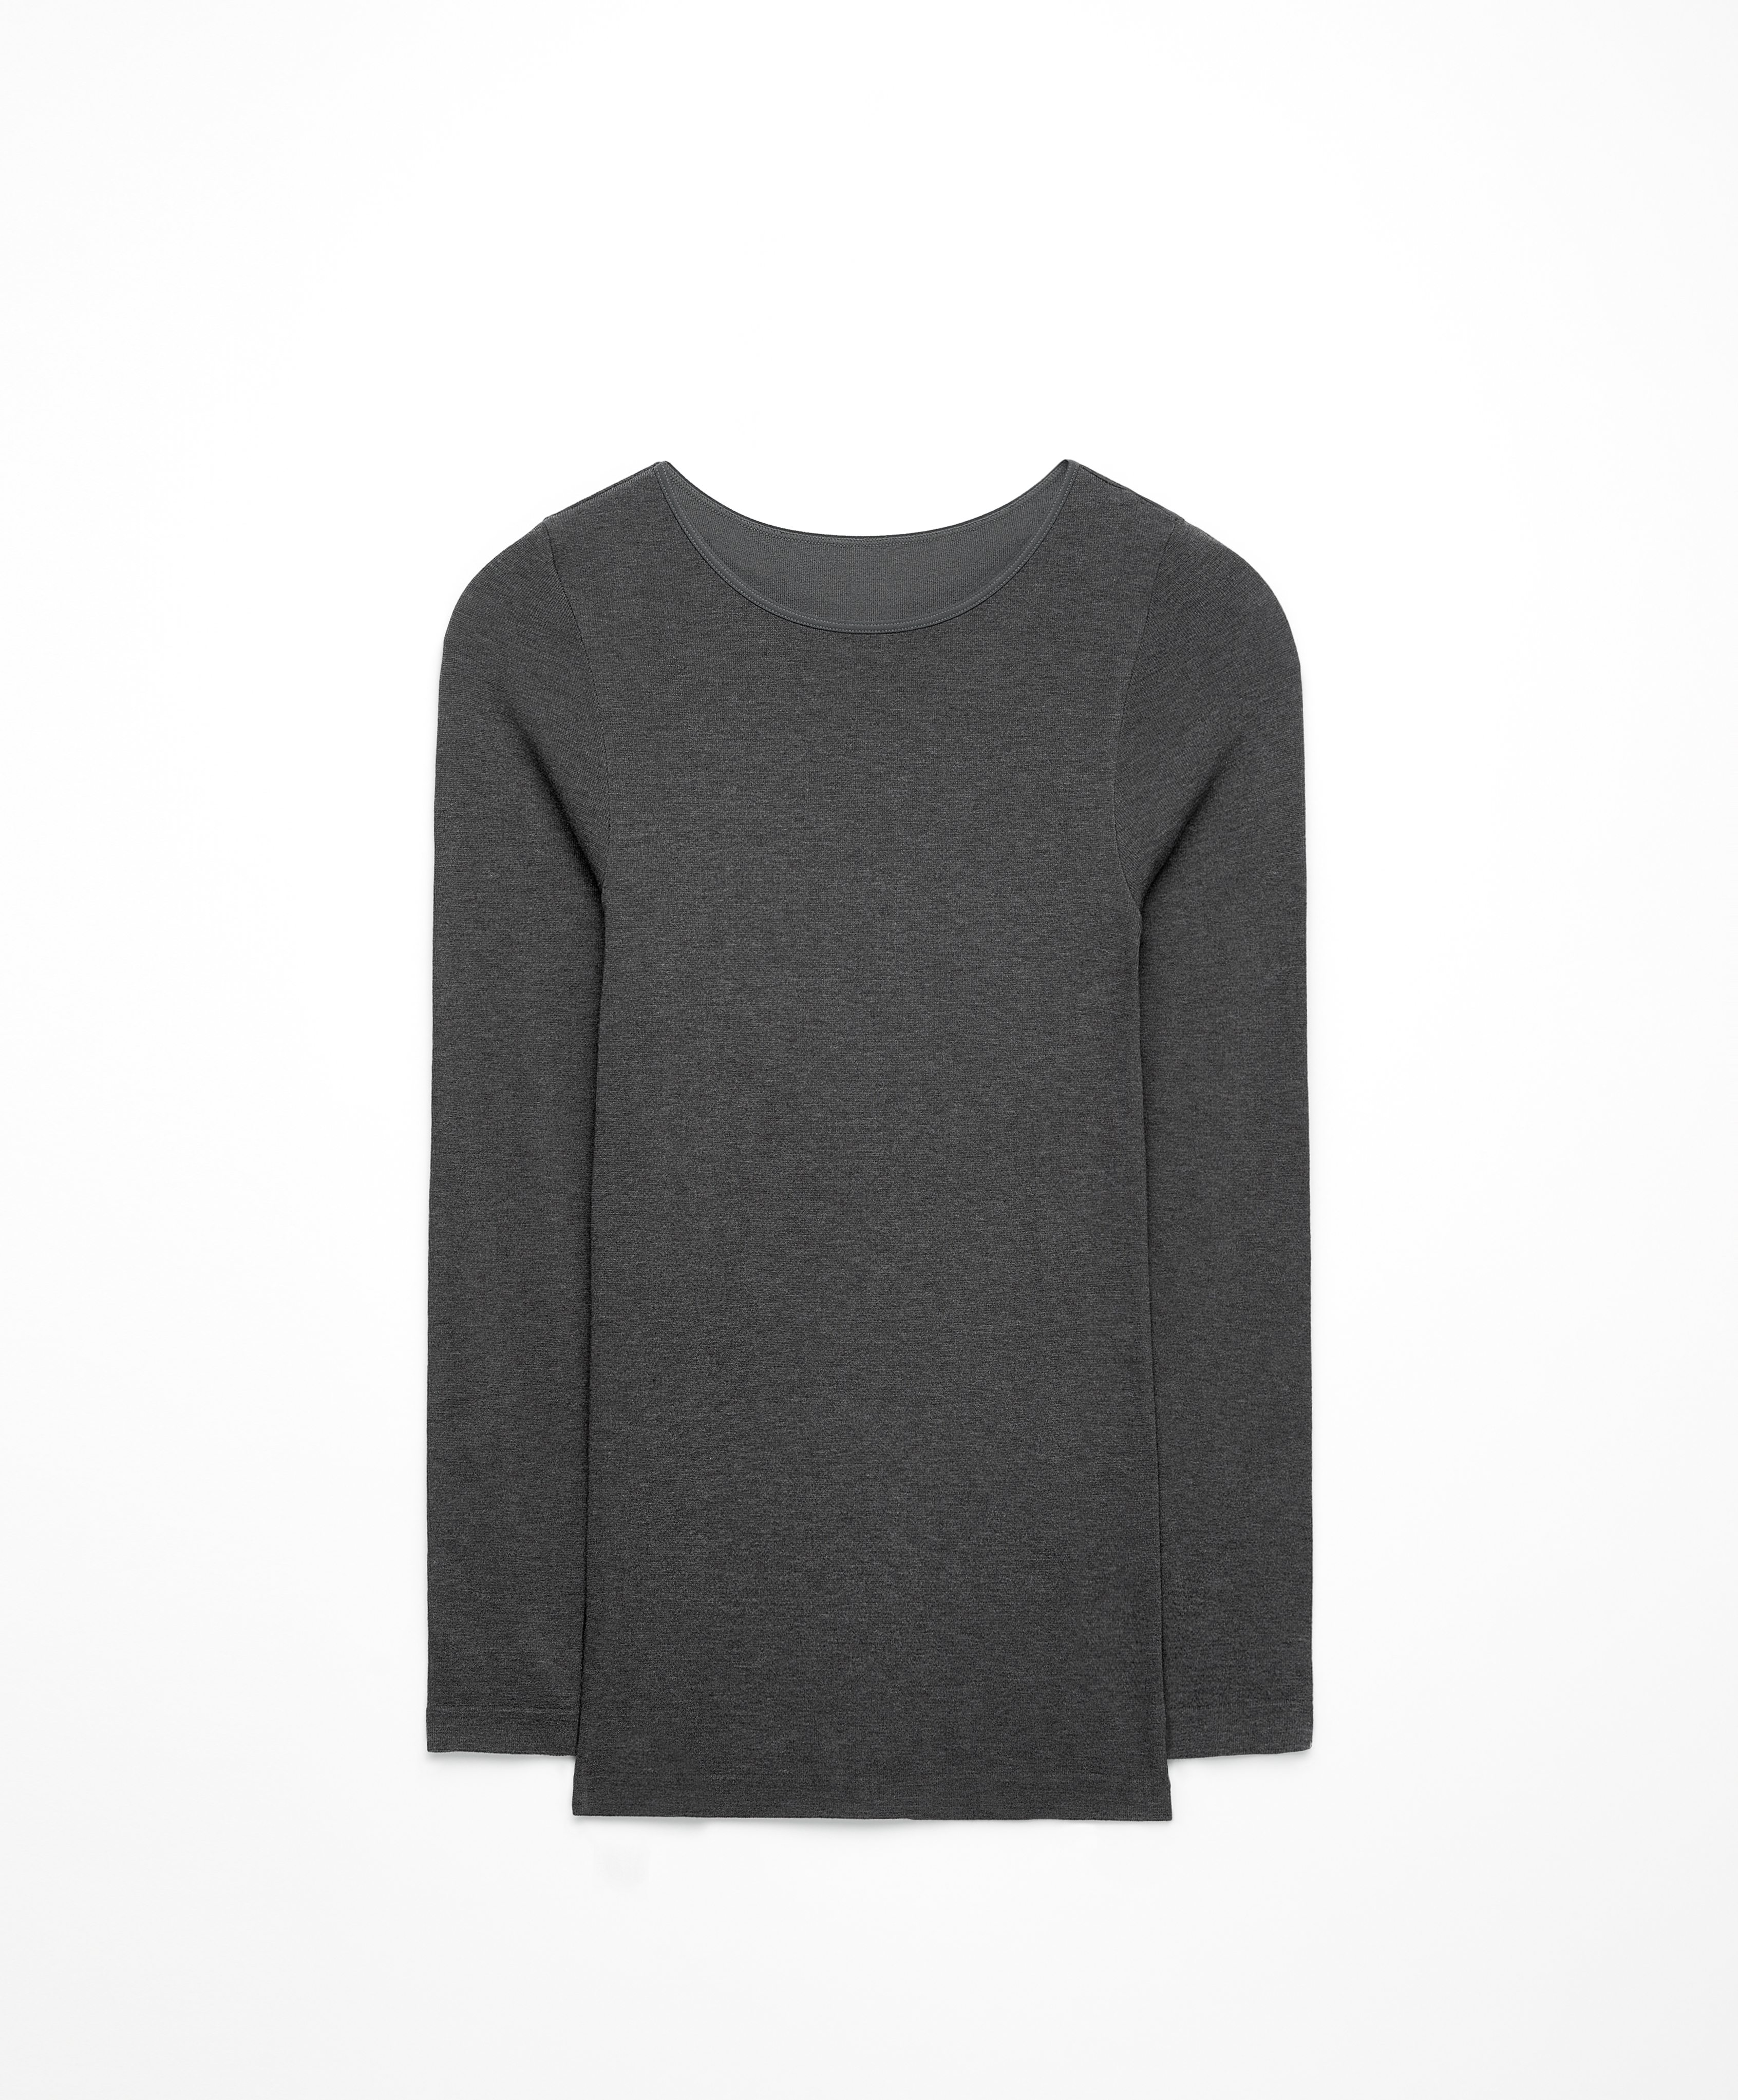 OYSHO SUPER EXTRA WARMTH LONG-SLEEVED TECHNICAL TOP IN 100% WOOL